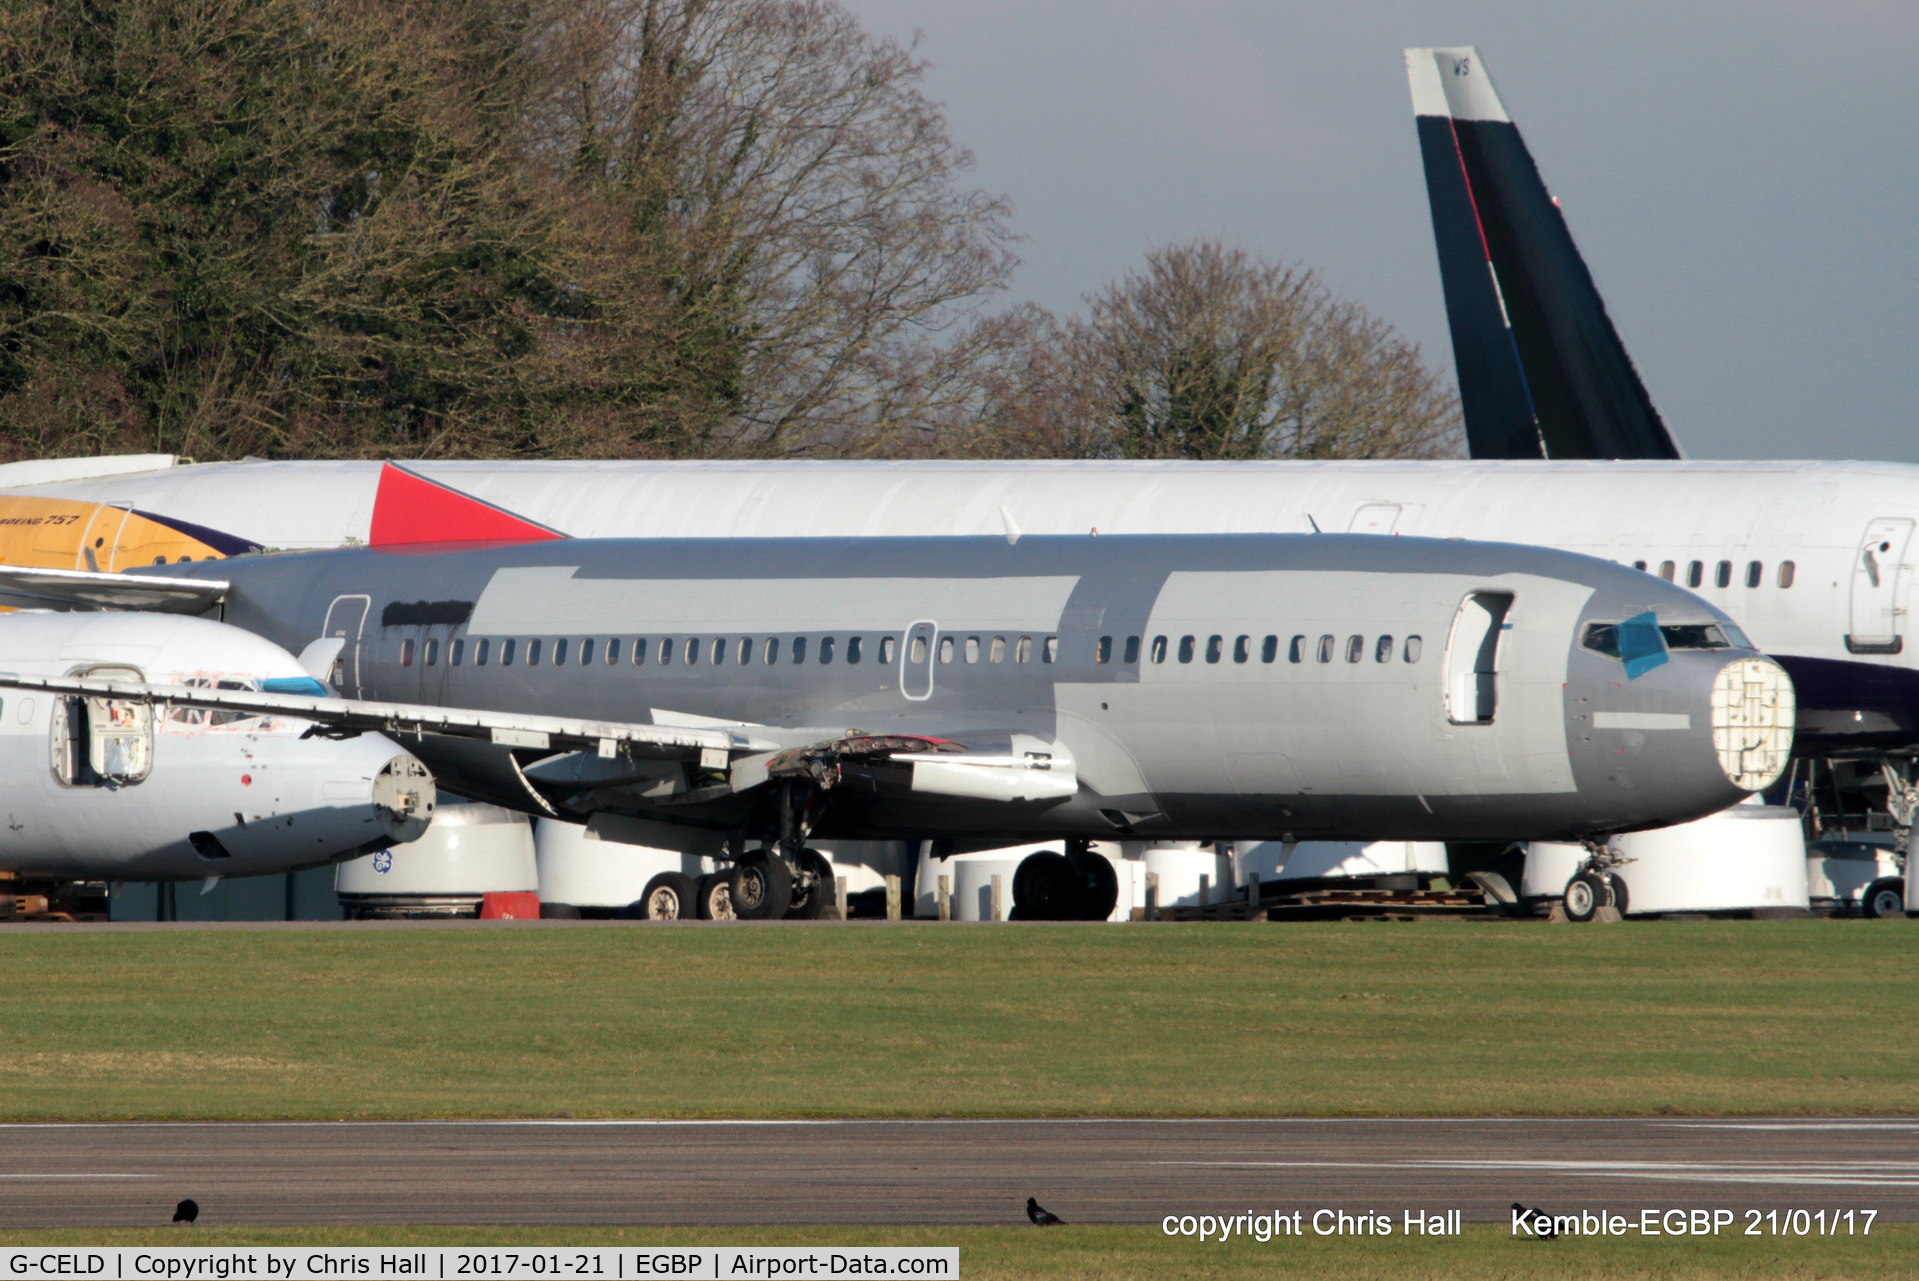 G-CELD, 1987 Boeing 737-33A C/N 23832, in the scrapping area at Kemble